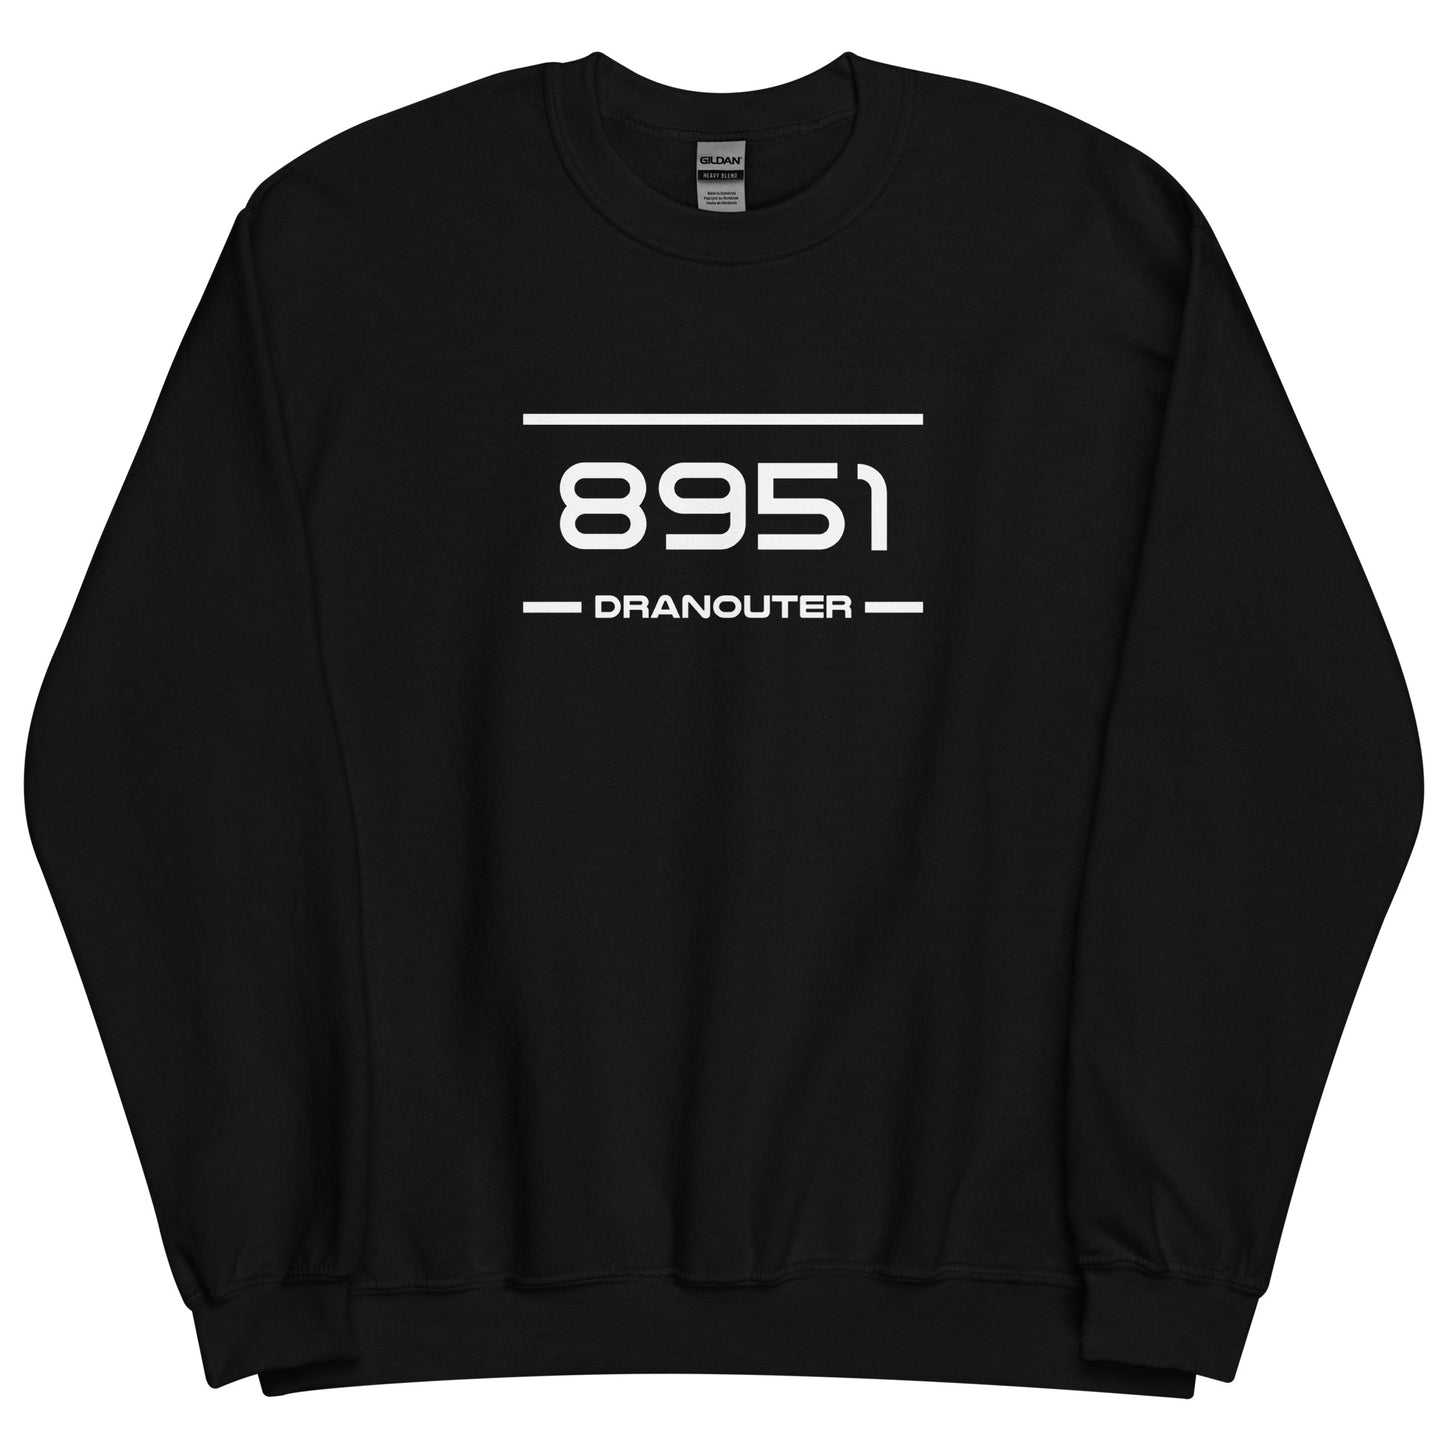 Sweater - 8951 - Dranouter (M/V)